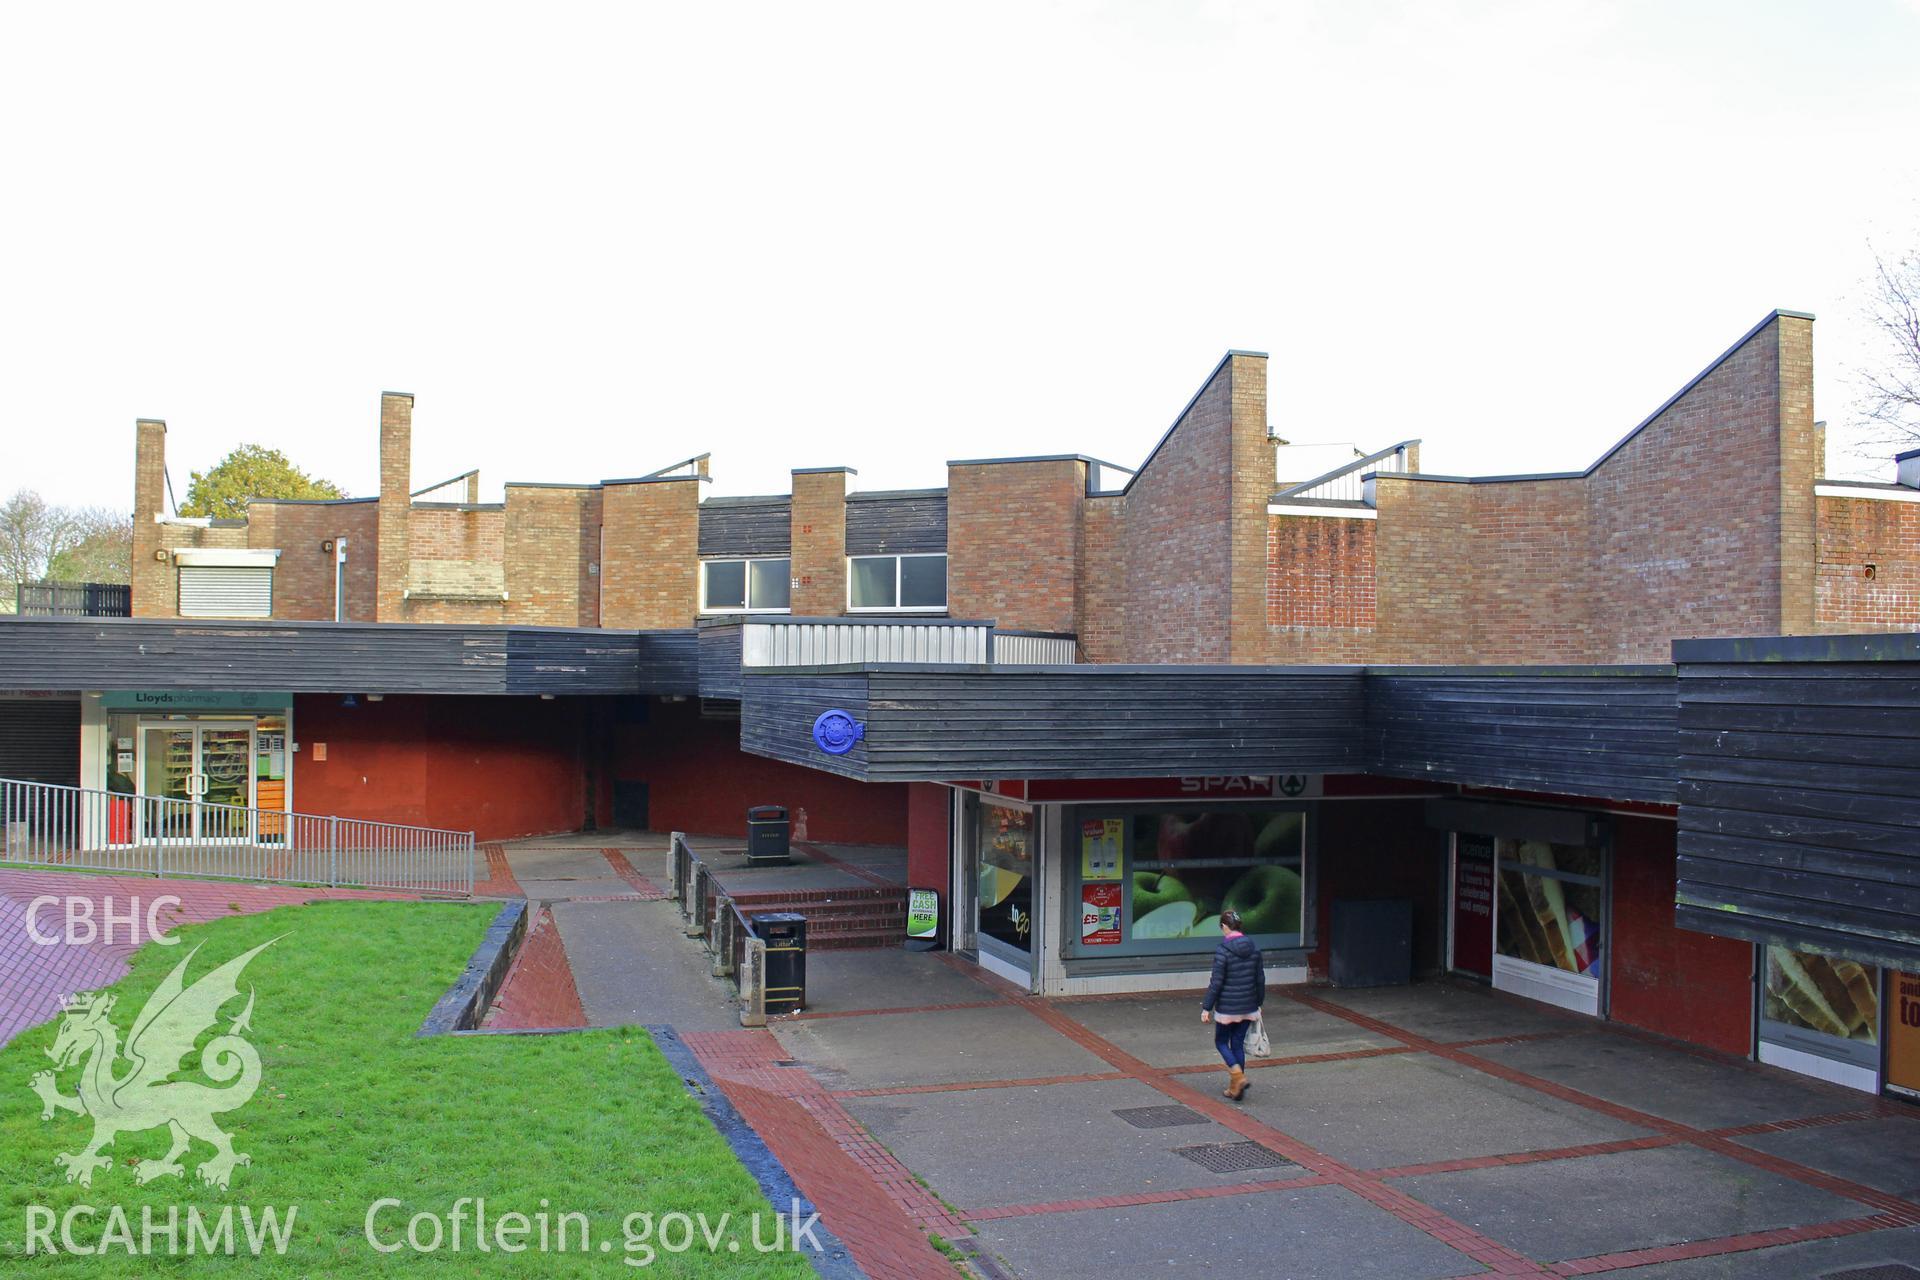 Exterior views of Fairwater Square, Cwmbran, including walkway. Photograph taken by Sue Fielding in November 2017.